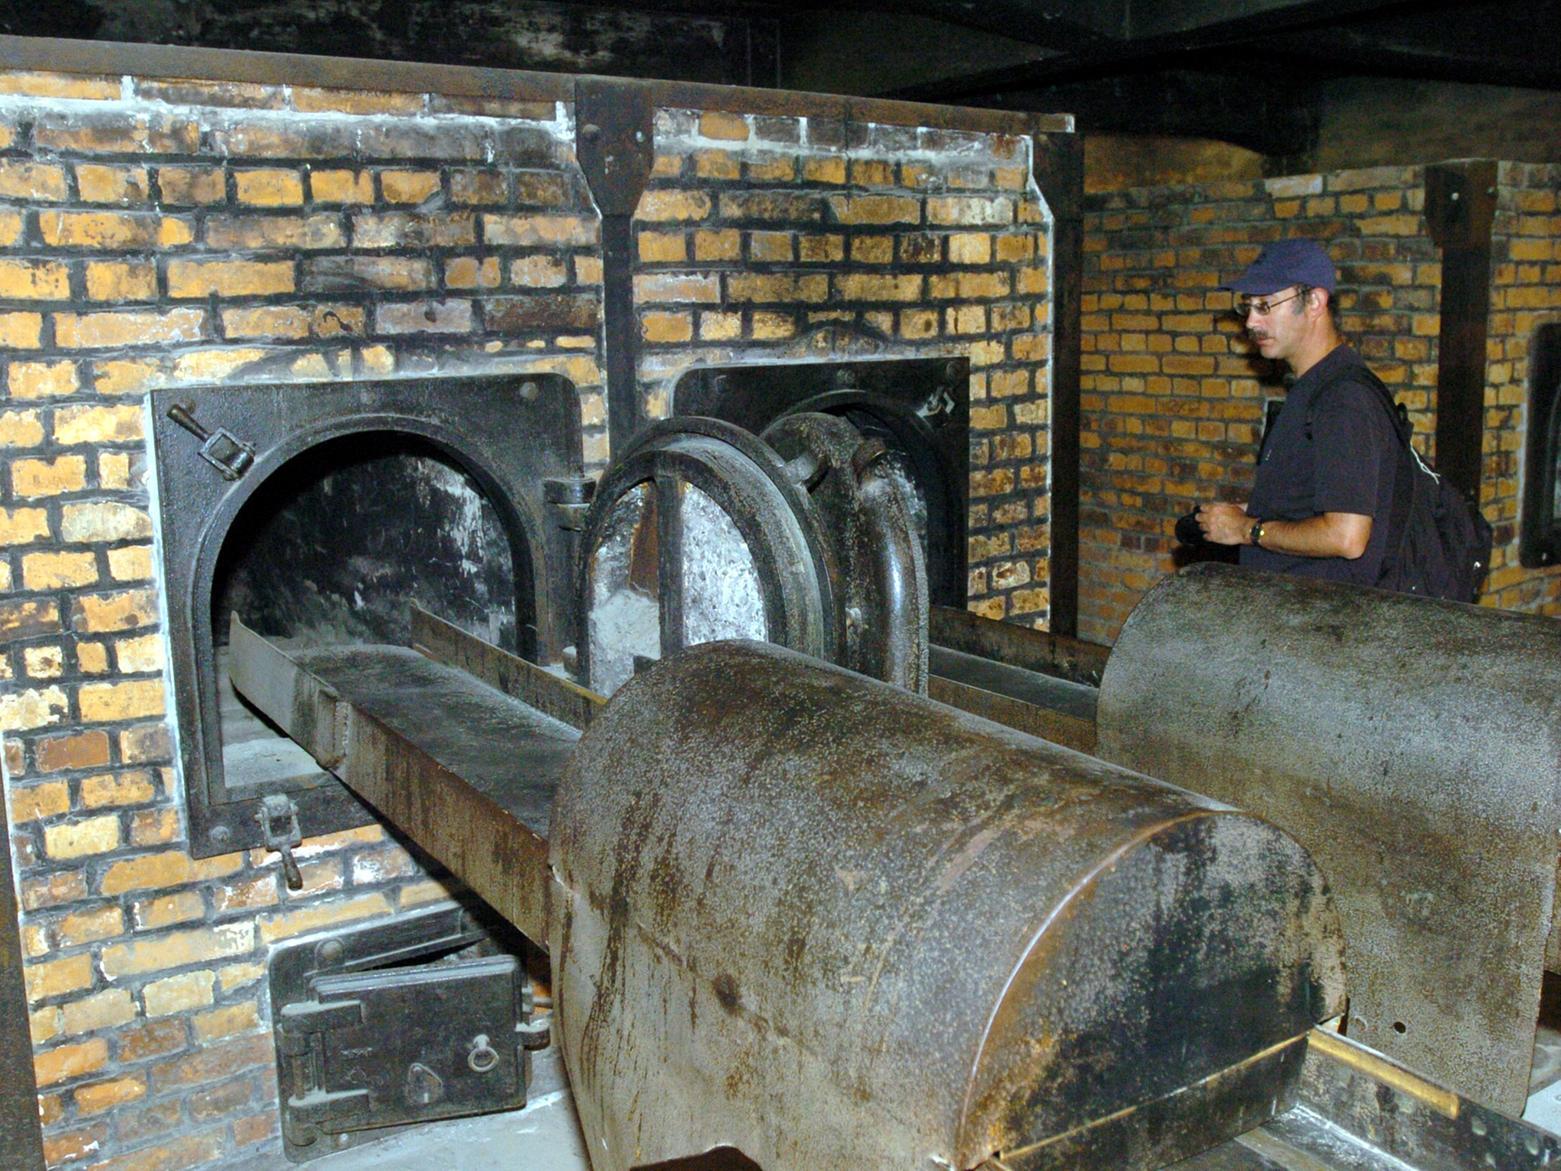 Murray Shiffeldrin pauses by the oven used to destroy the evidence of the gas chambers.